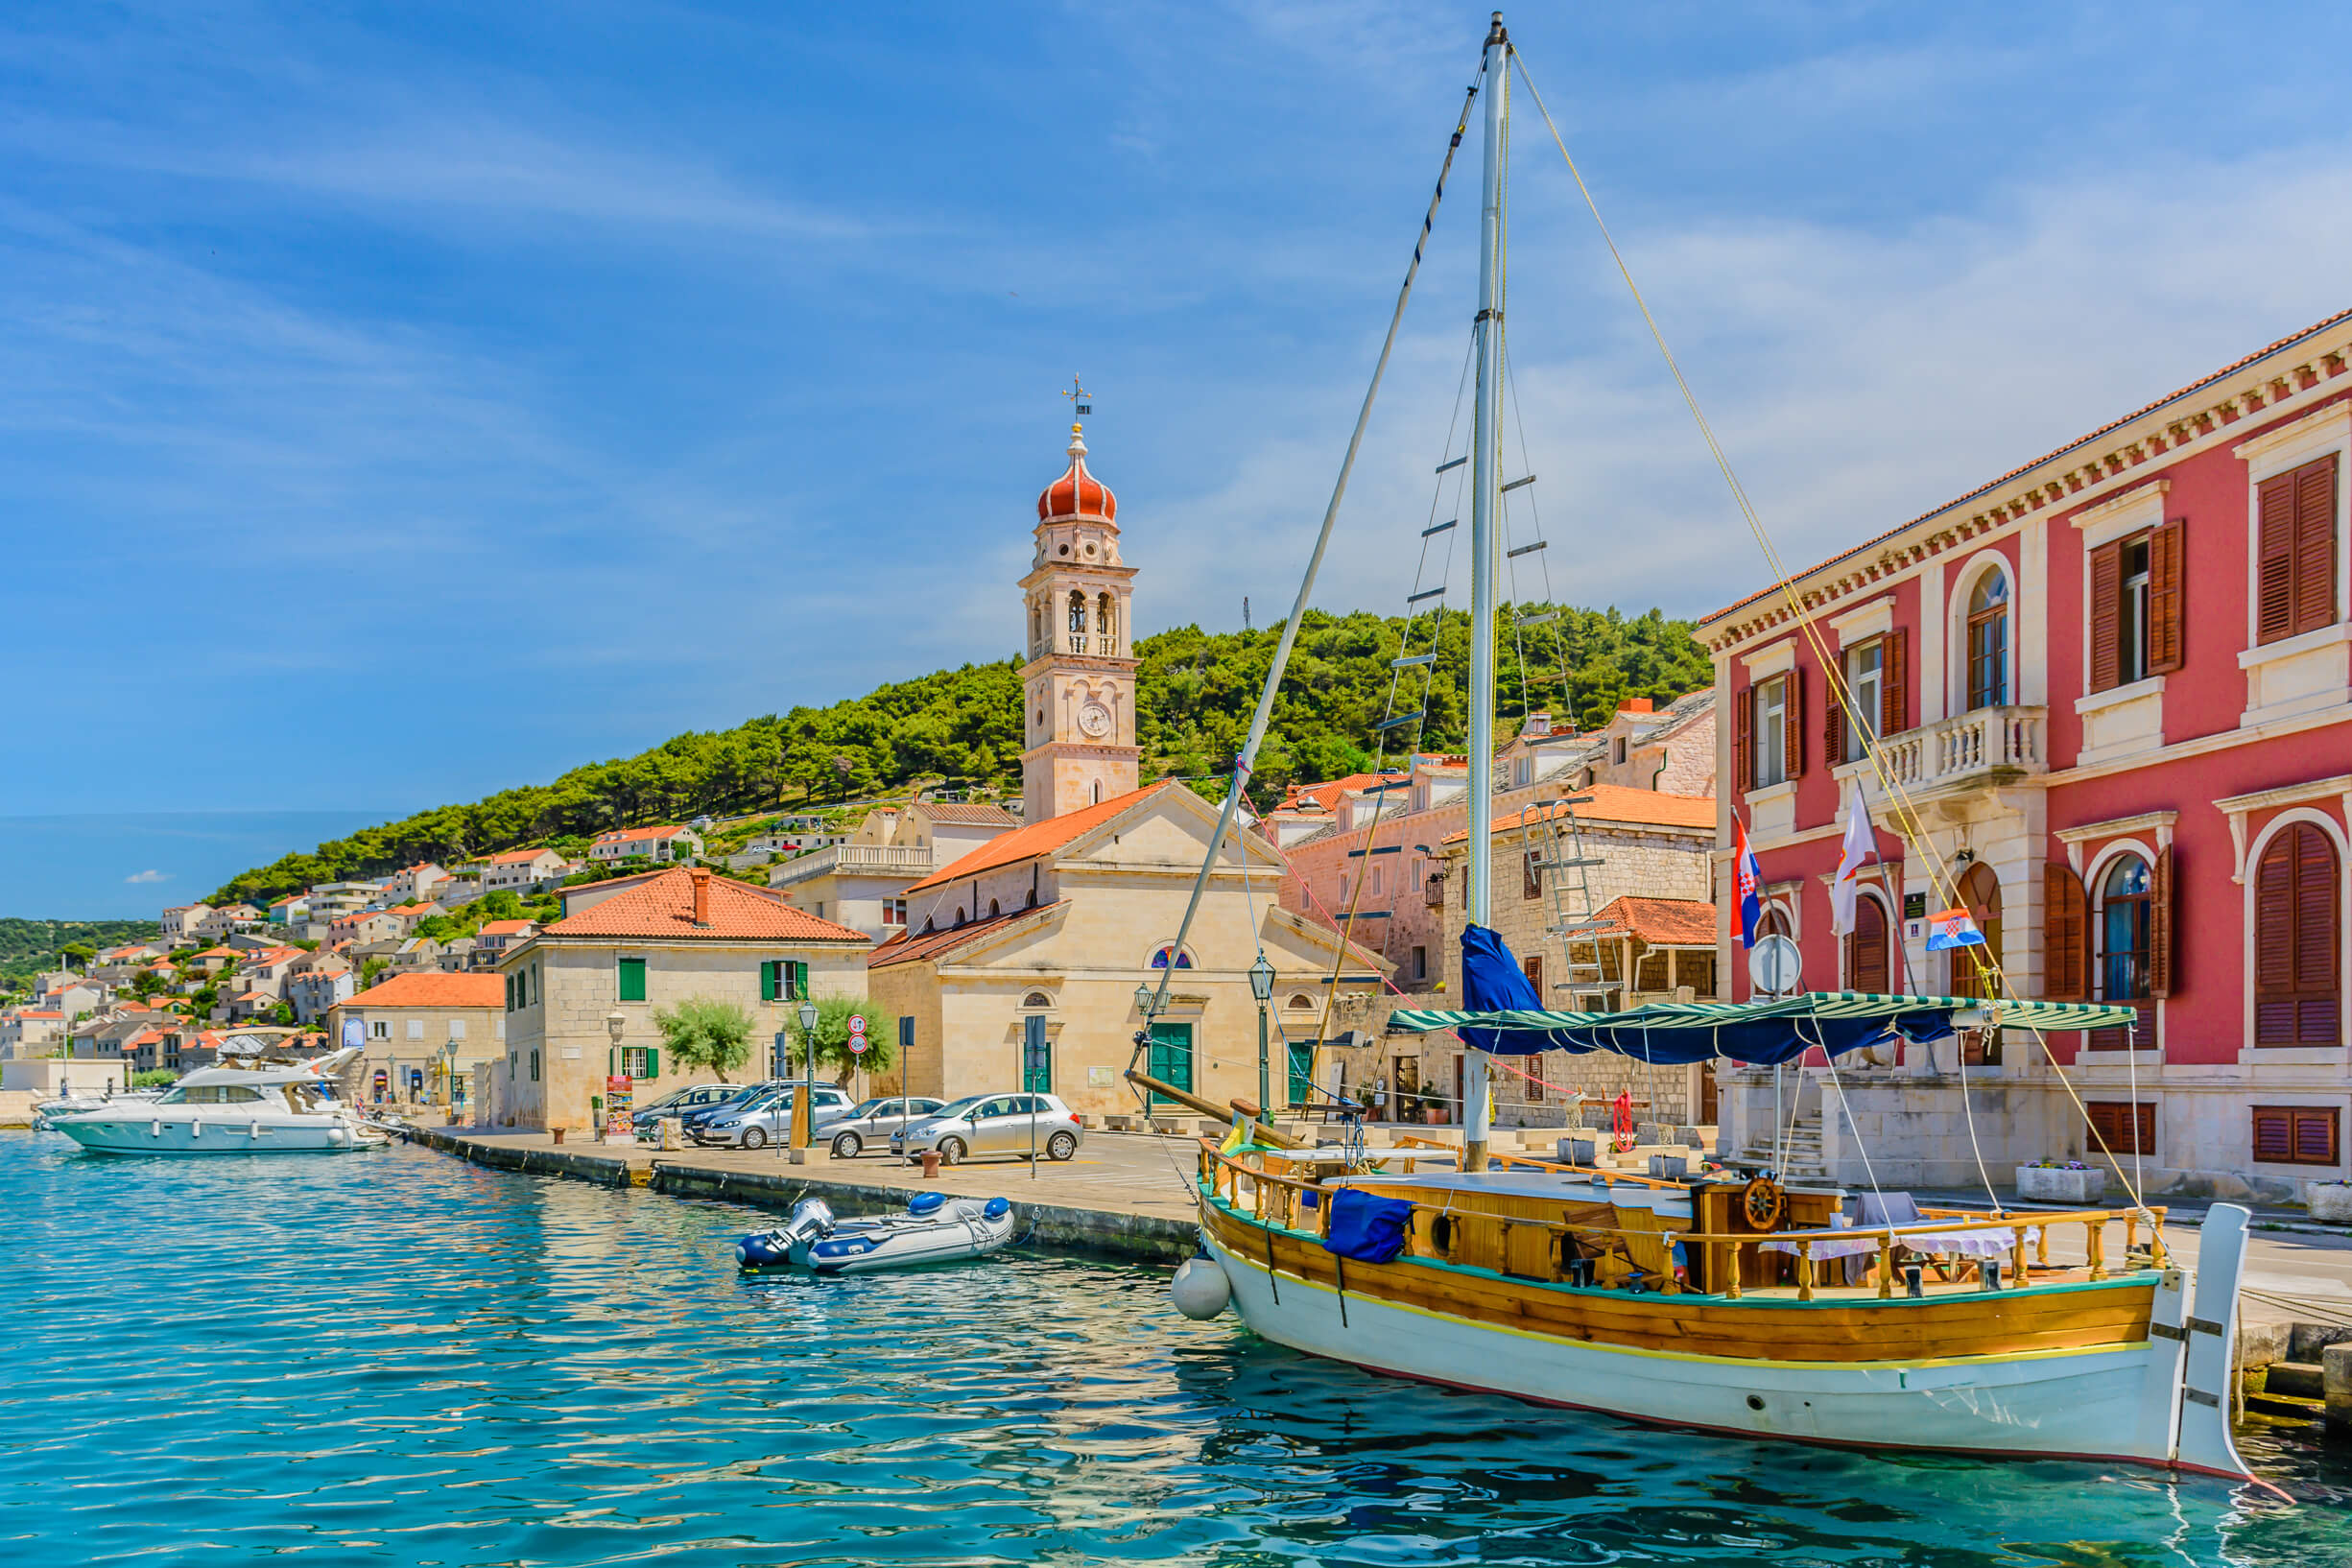 Pucisca is small town on Island of Brac